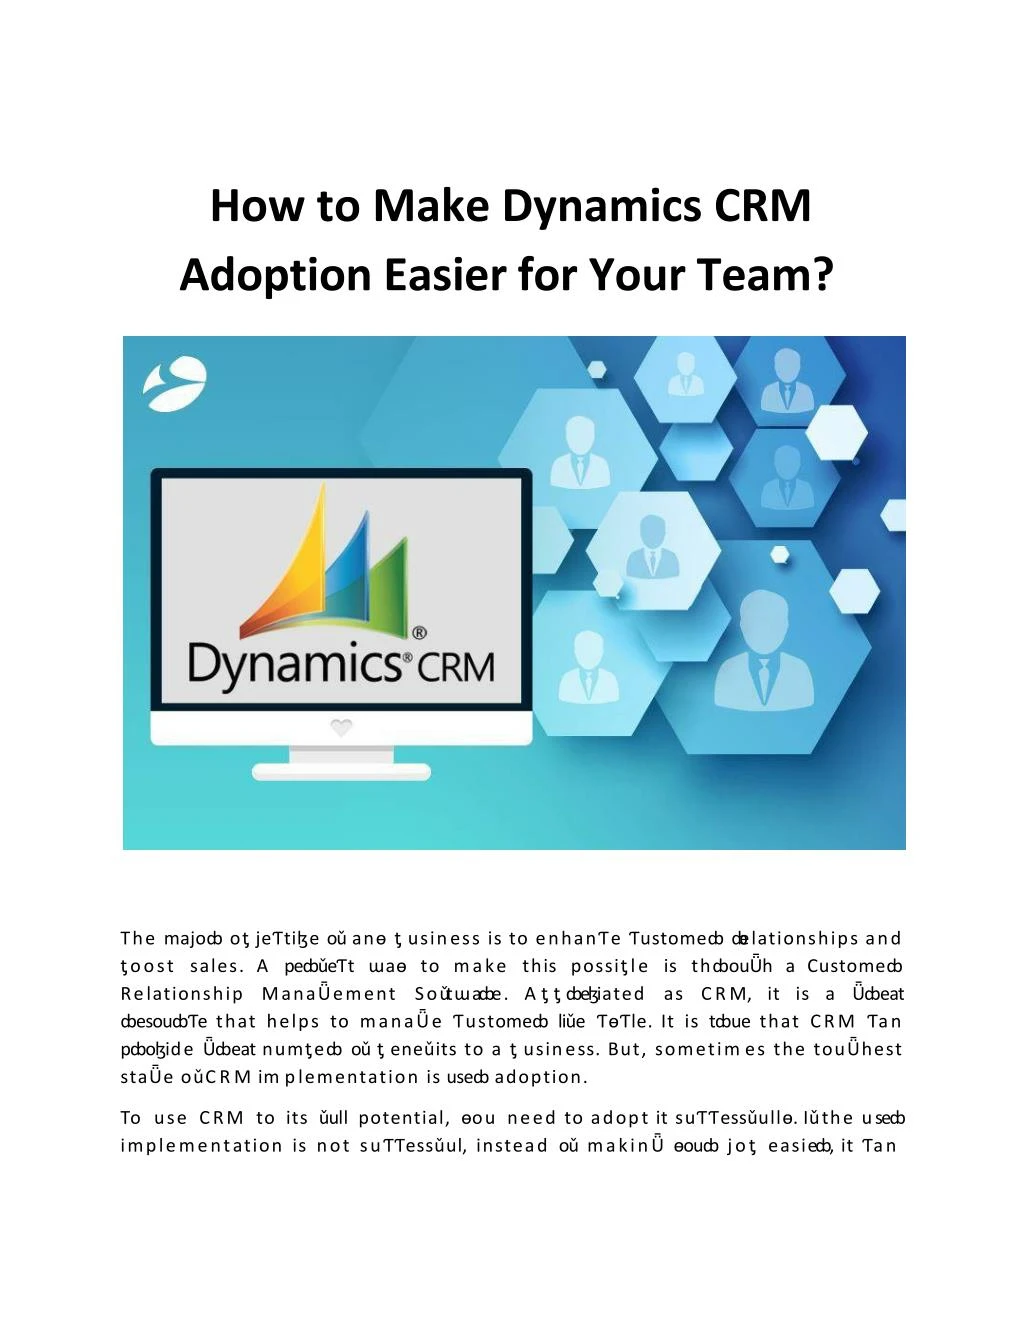 how to make dynamics crm adoption easier for your team